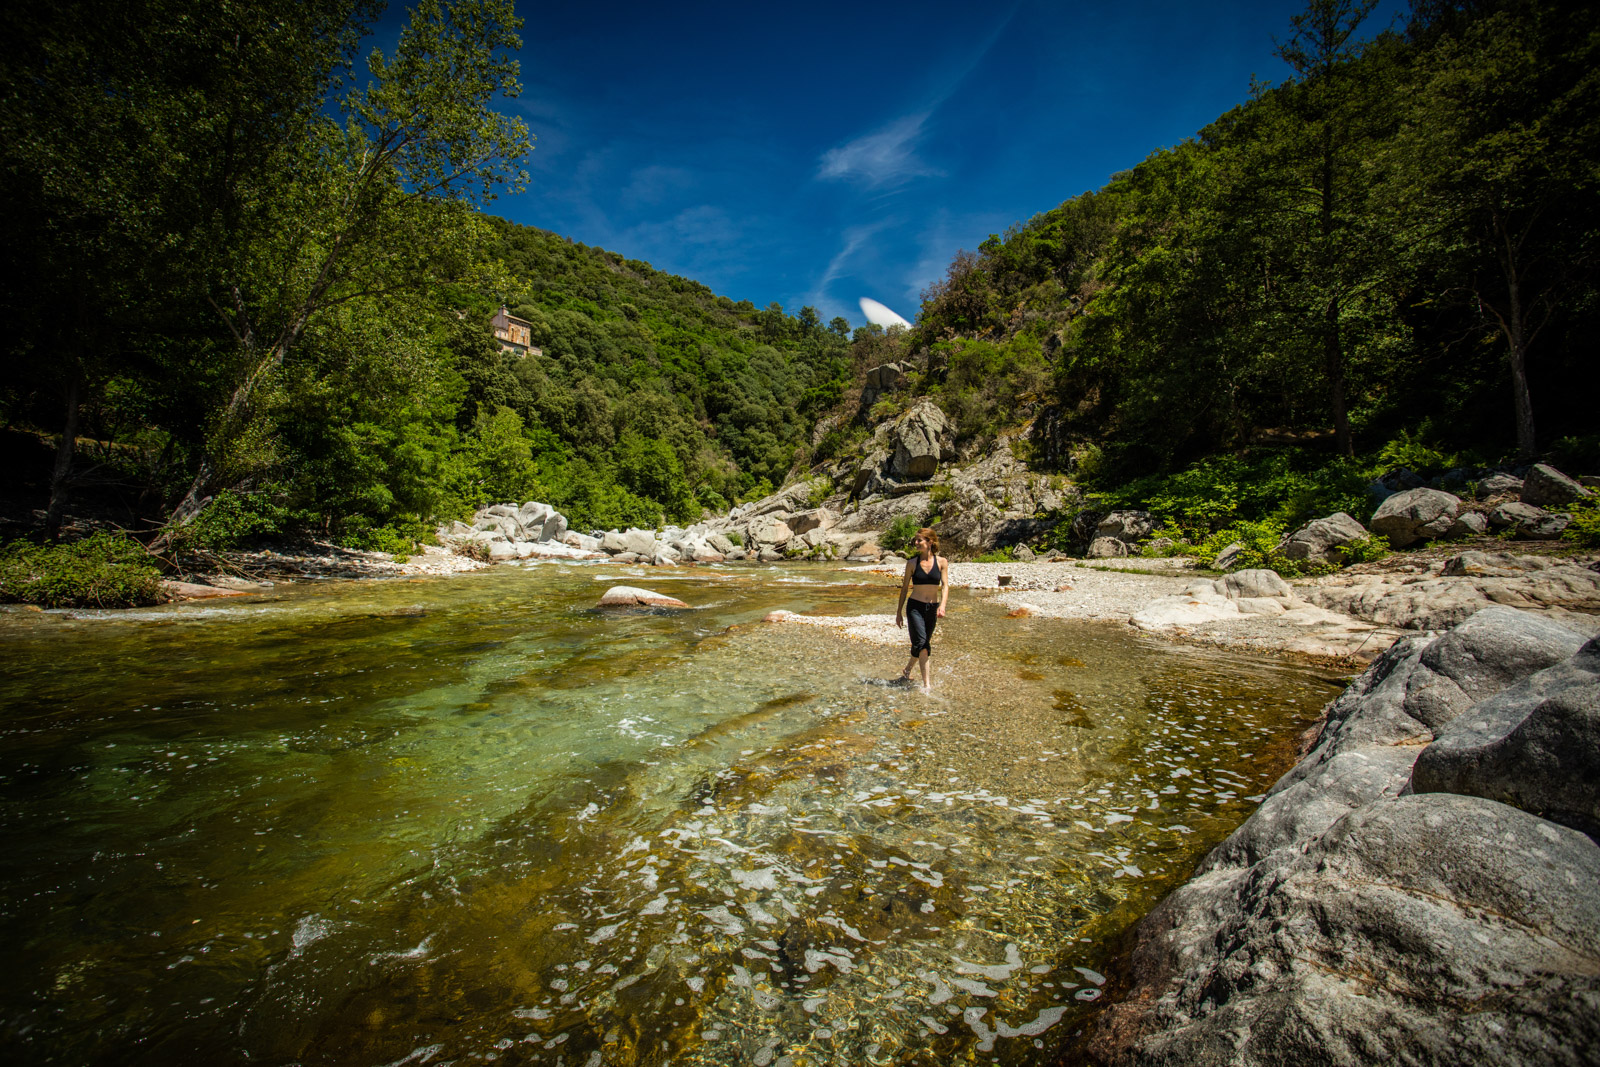 Bathing Camping 'Cevennes-Provence' - Anduze